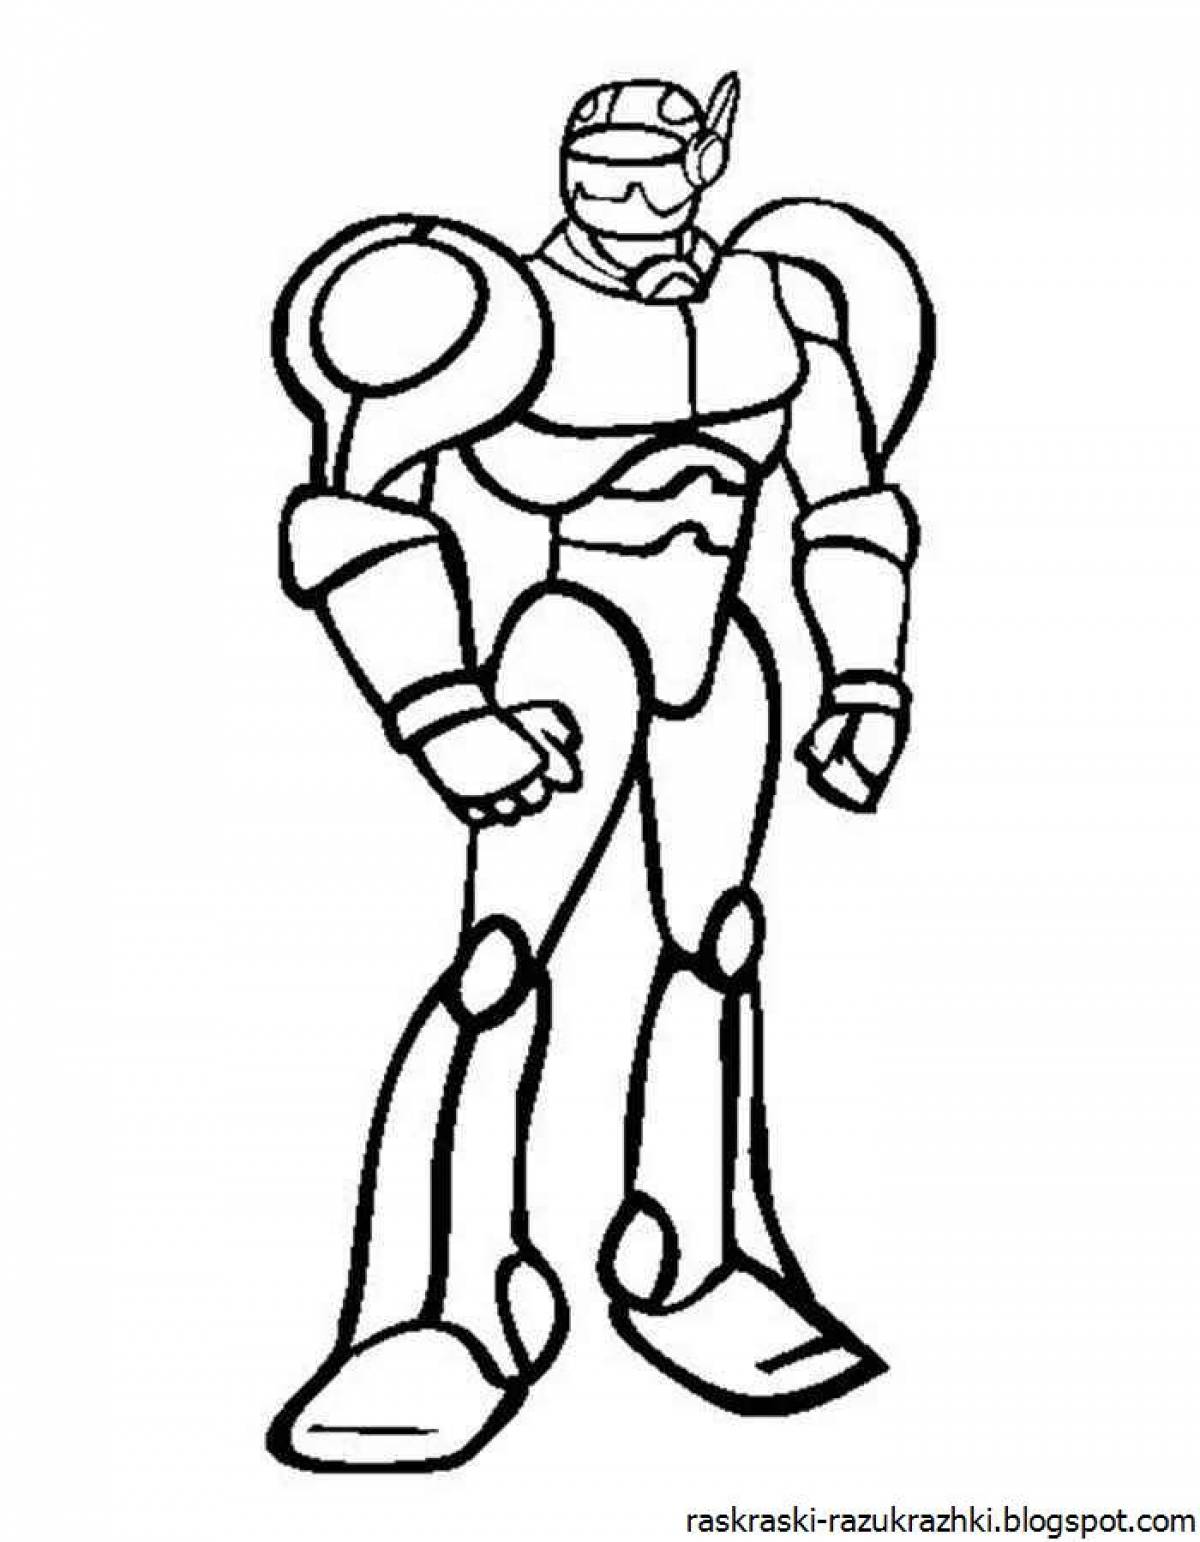 Colorful robot coloring page for boys